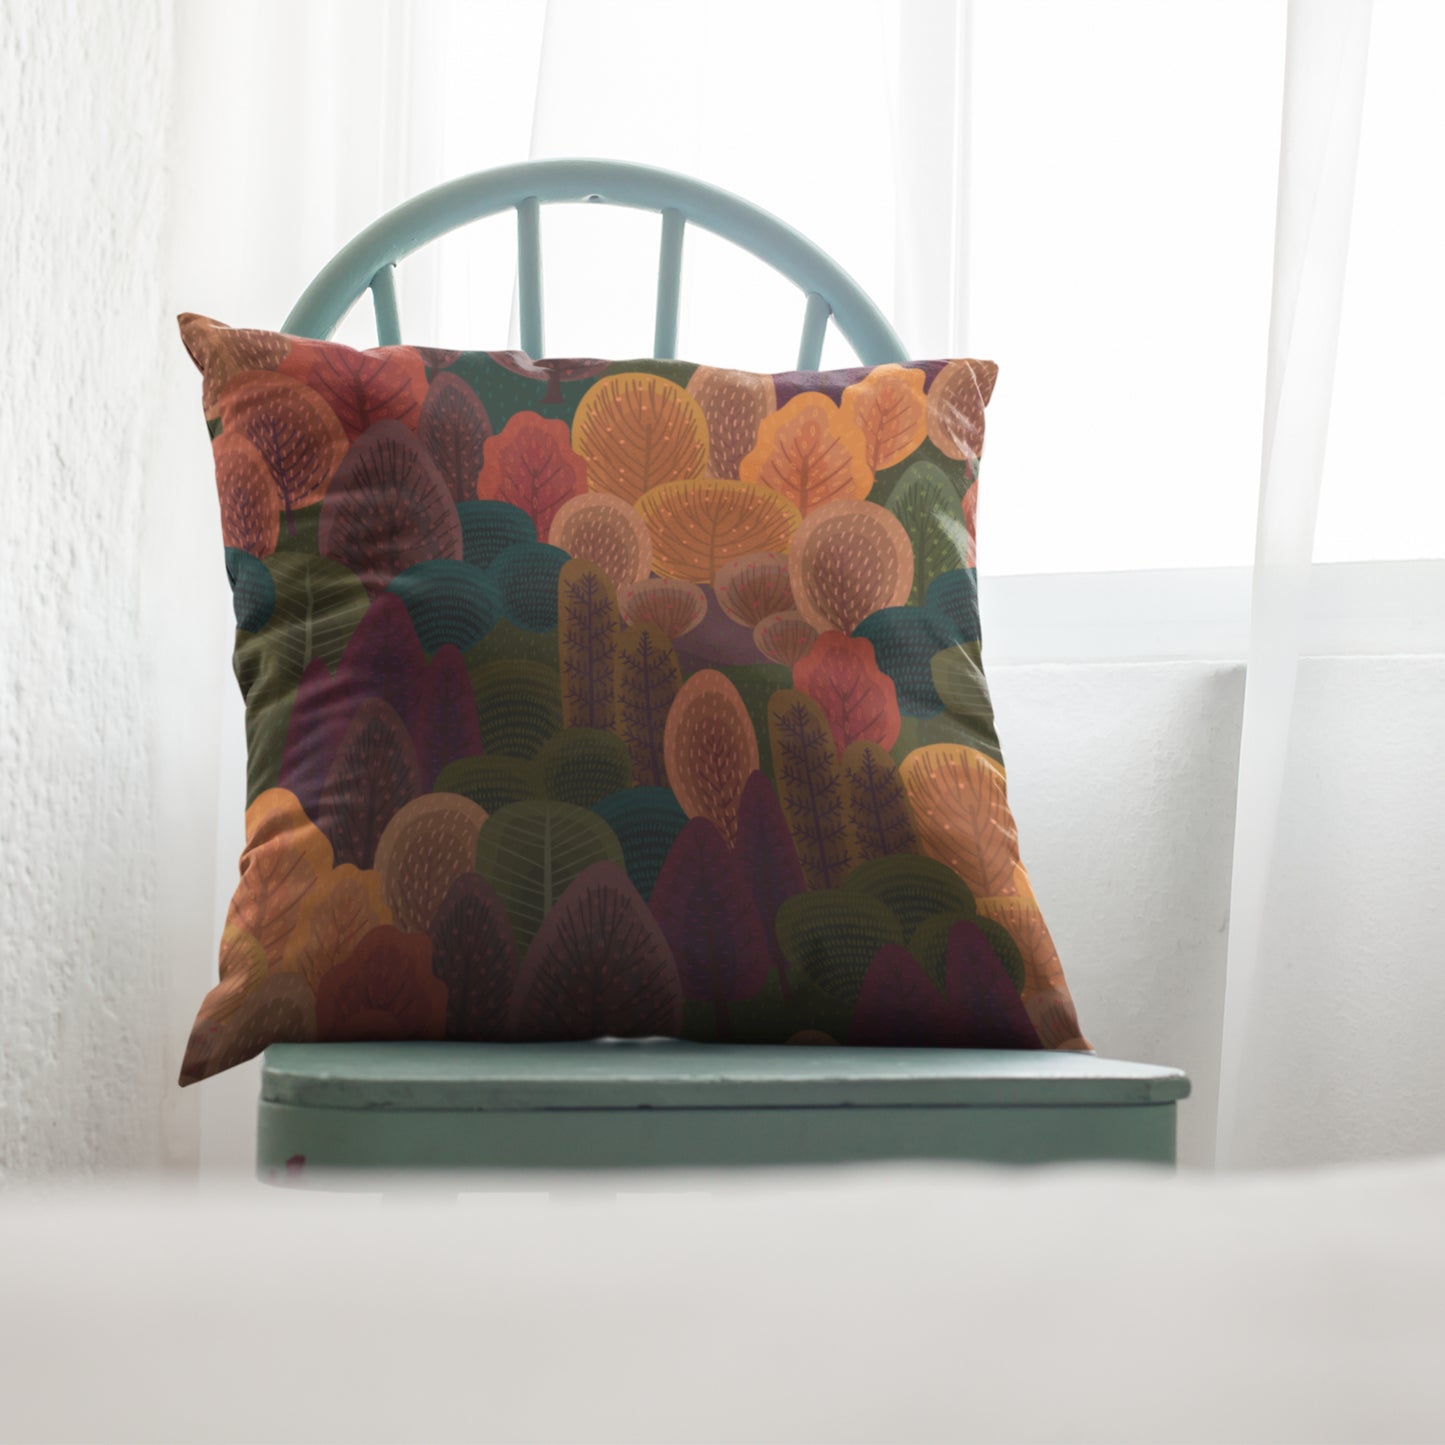 Fall Forest View Pattern Pillow, Autumn Season Decorative Cushion Cover by Homeezone